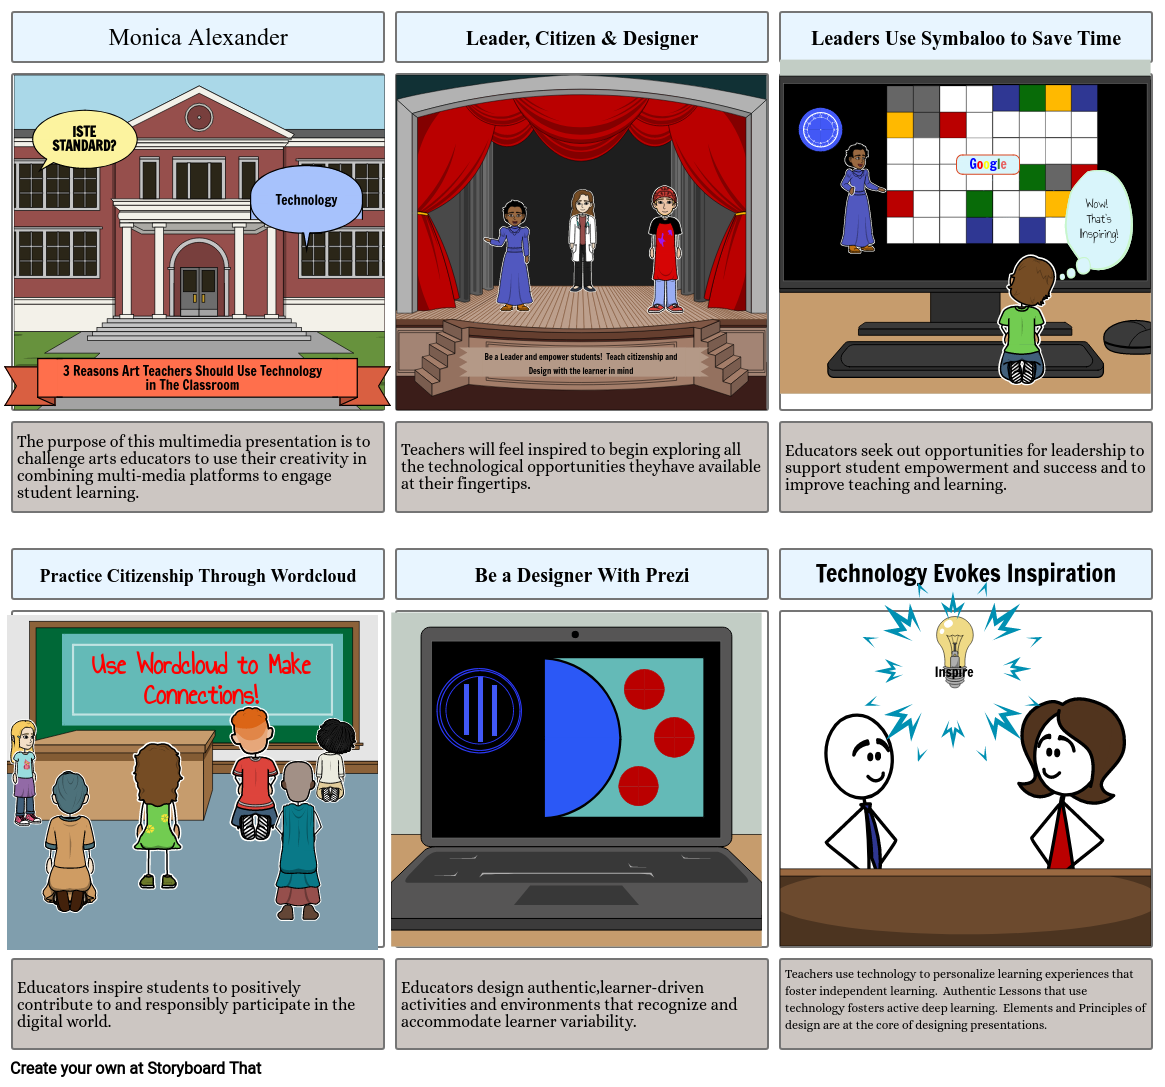 5-reasons-art-teachers-should-use-technology-in-the-classroom